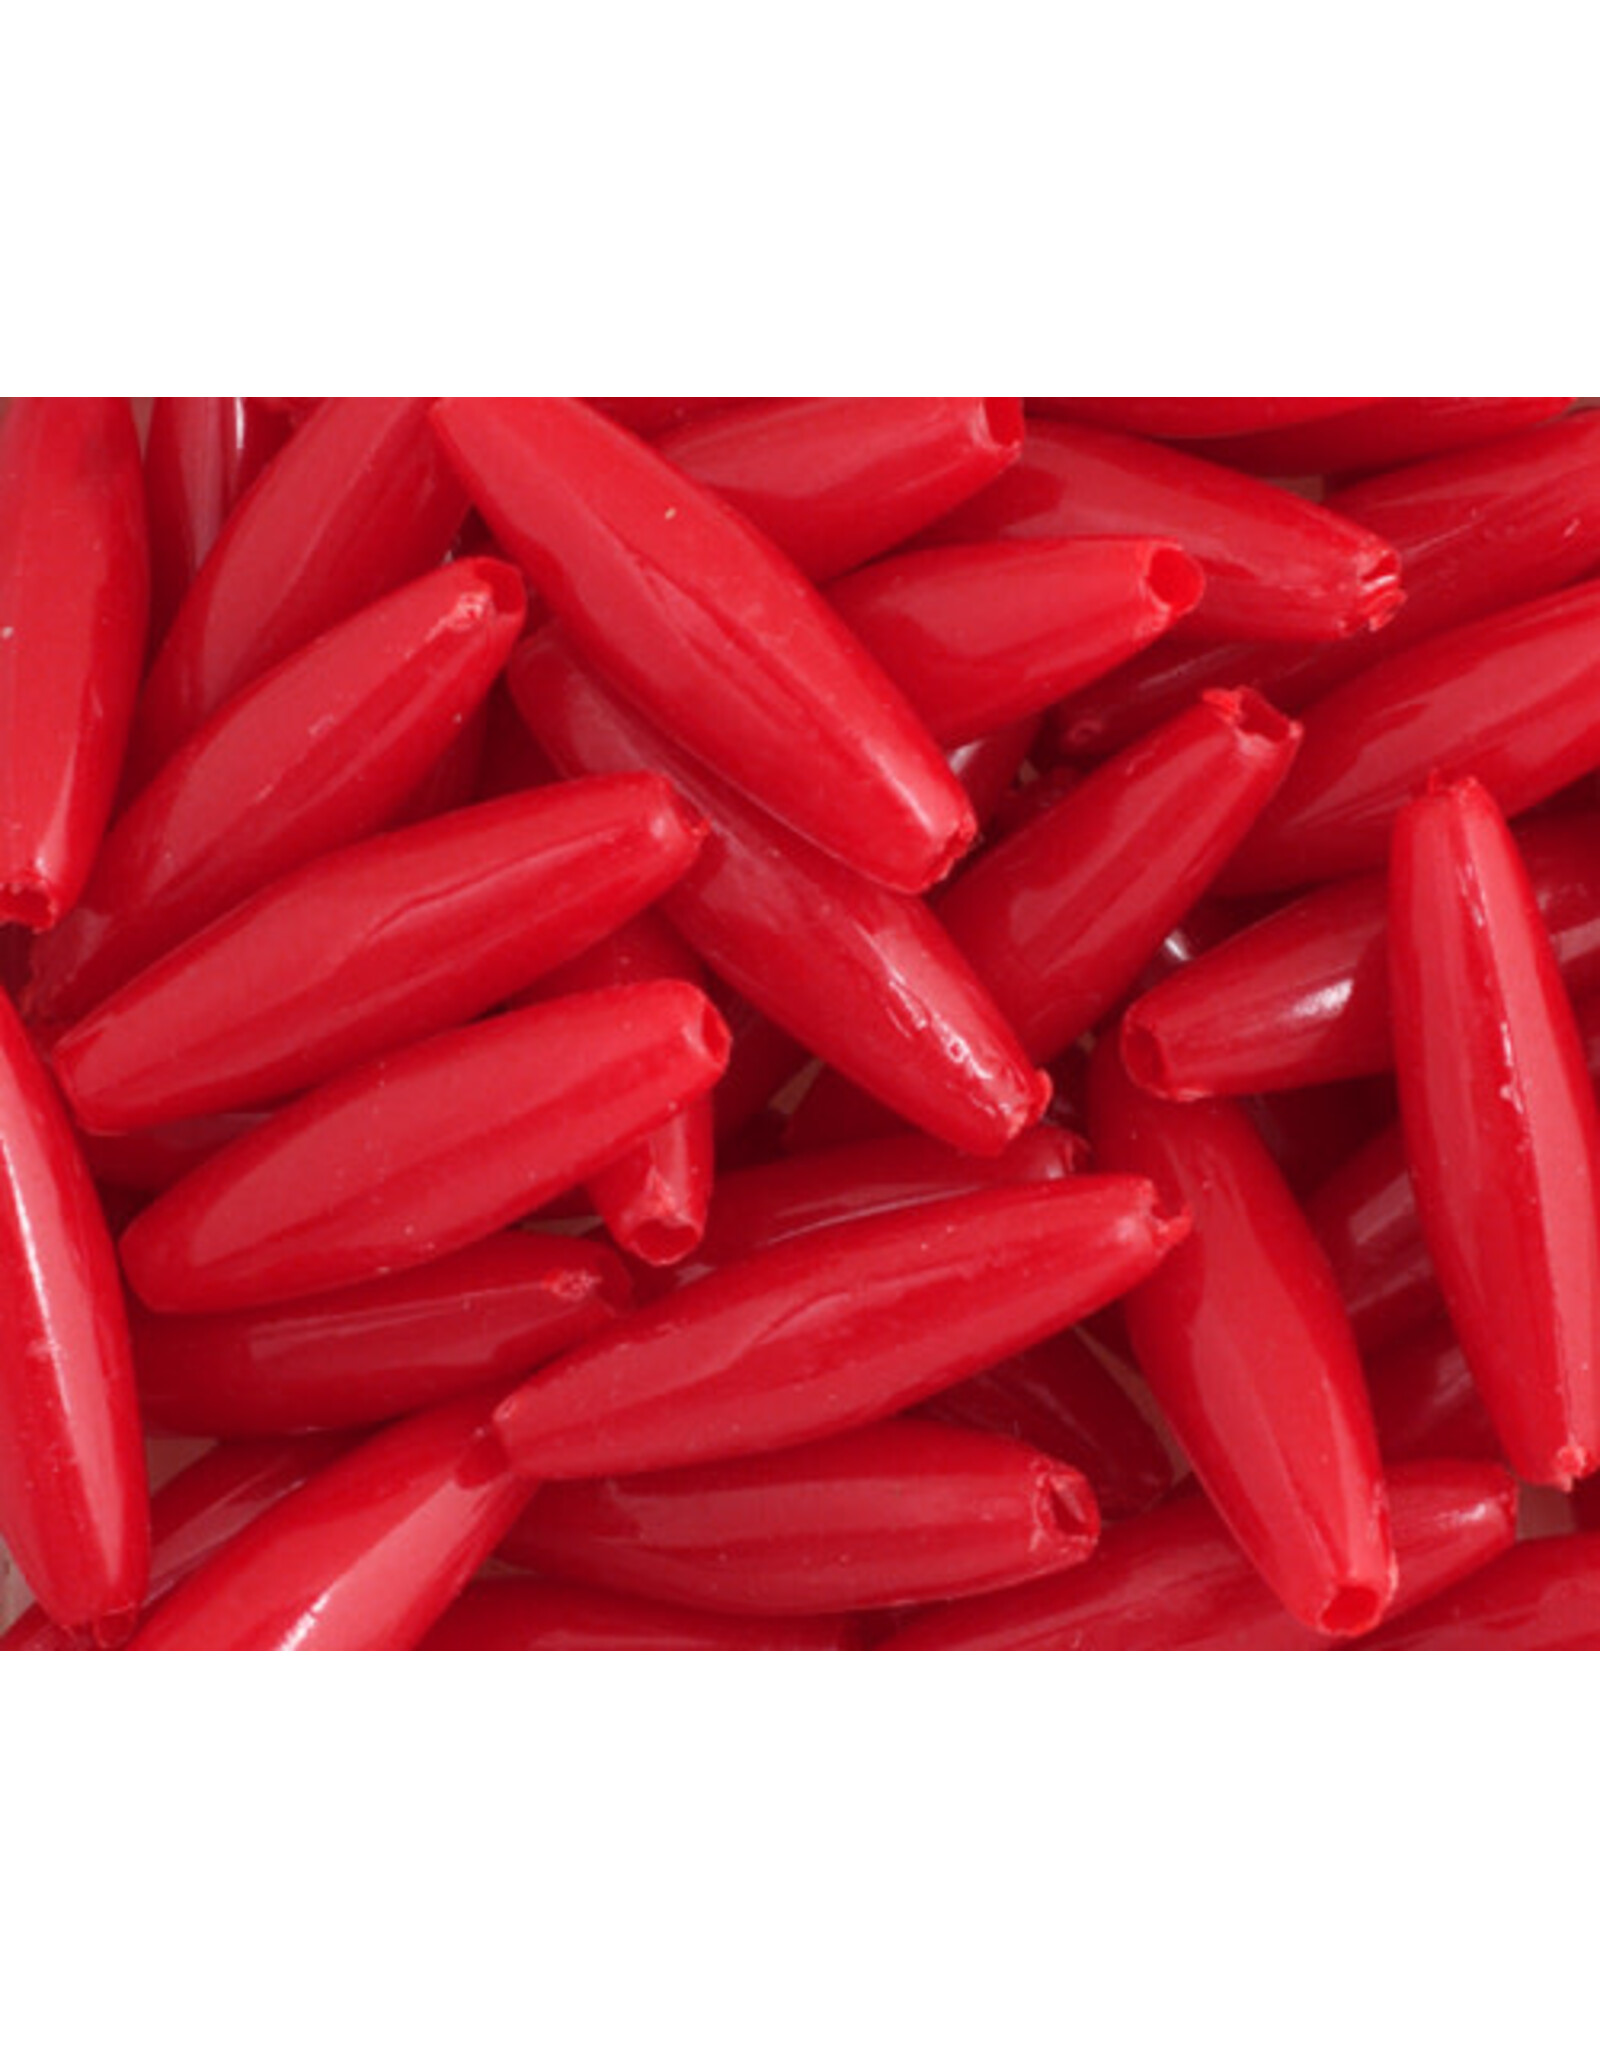 Spaghetti Beads 19x6mm Opaque Red x200